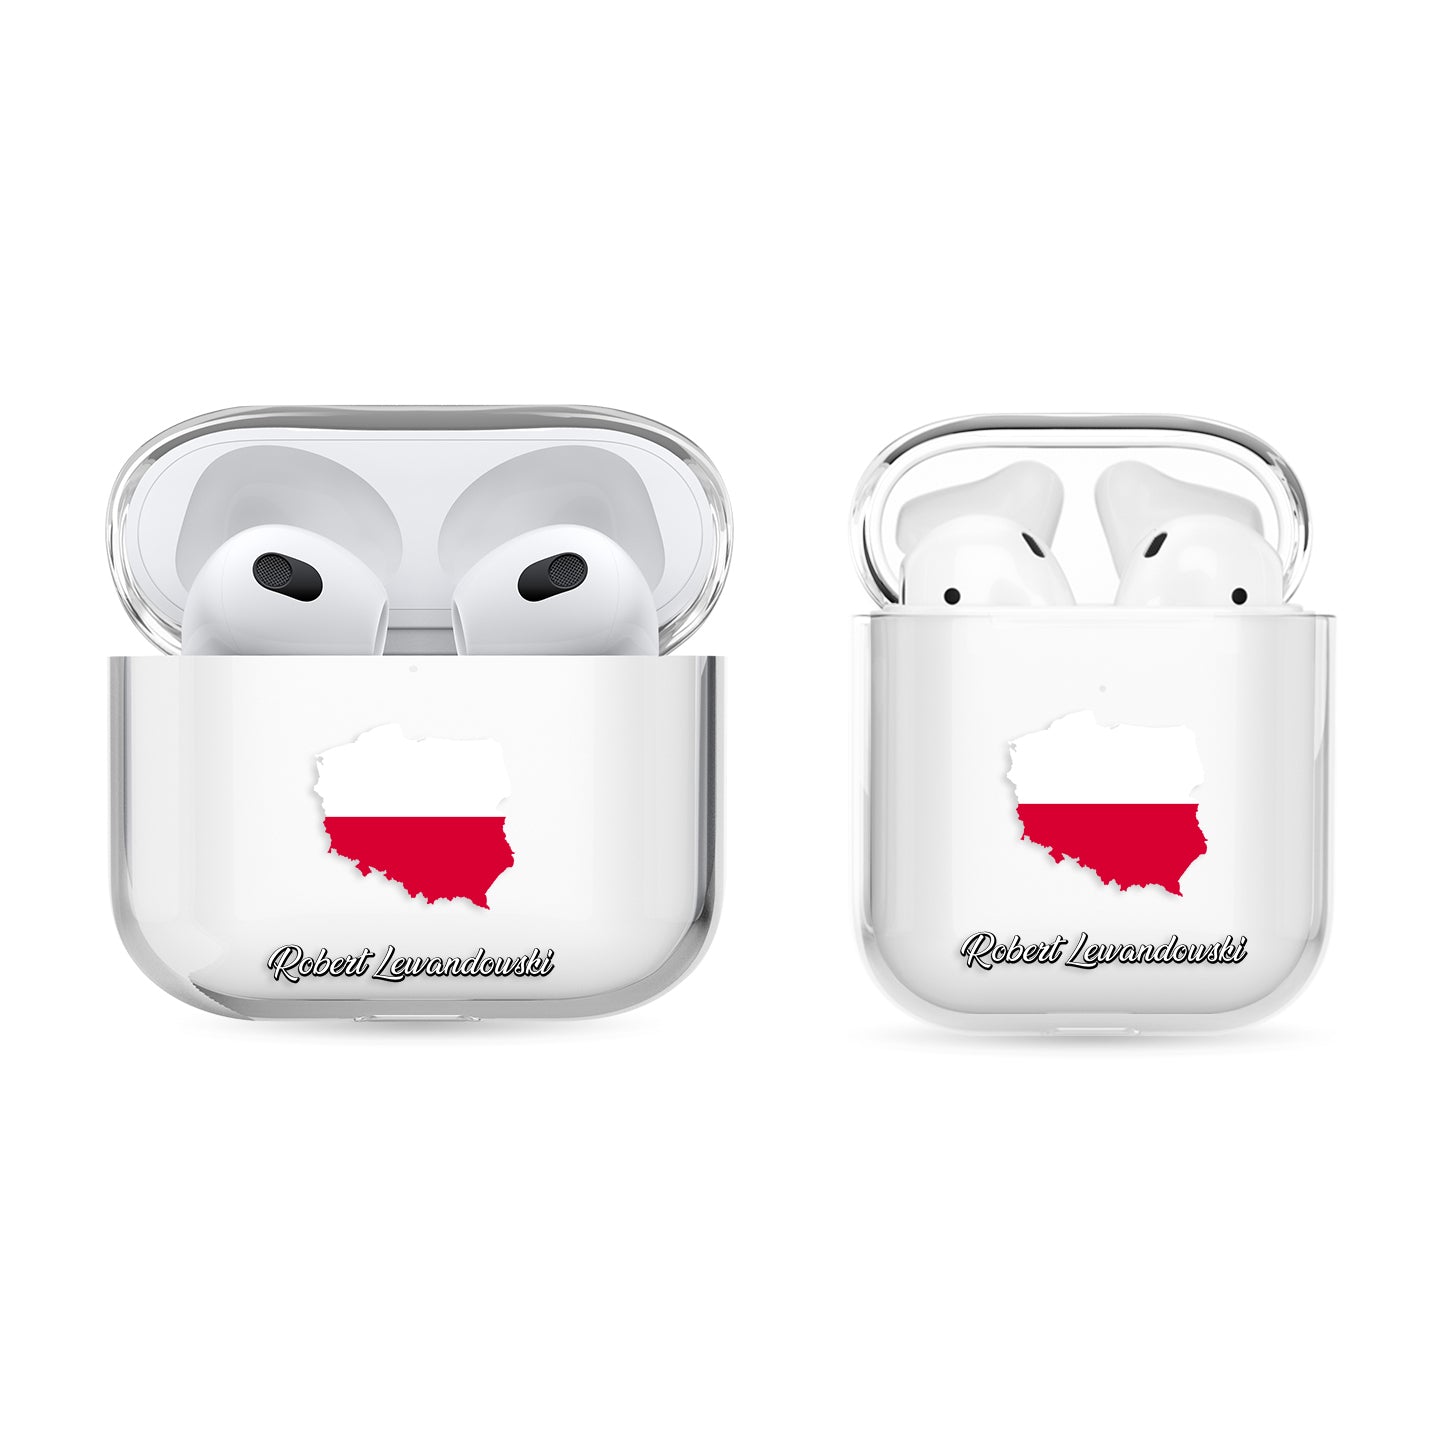 Airpods Hülle - Polen Flagge - 1instaphone